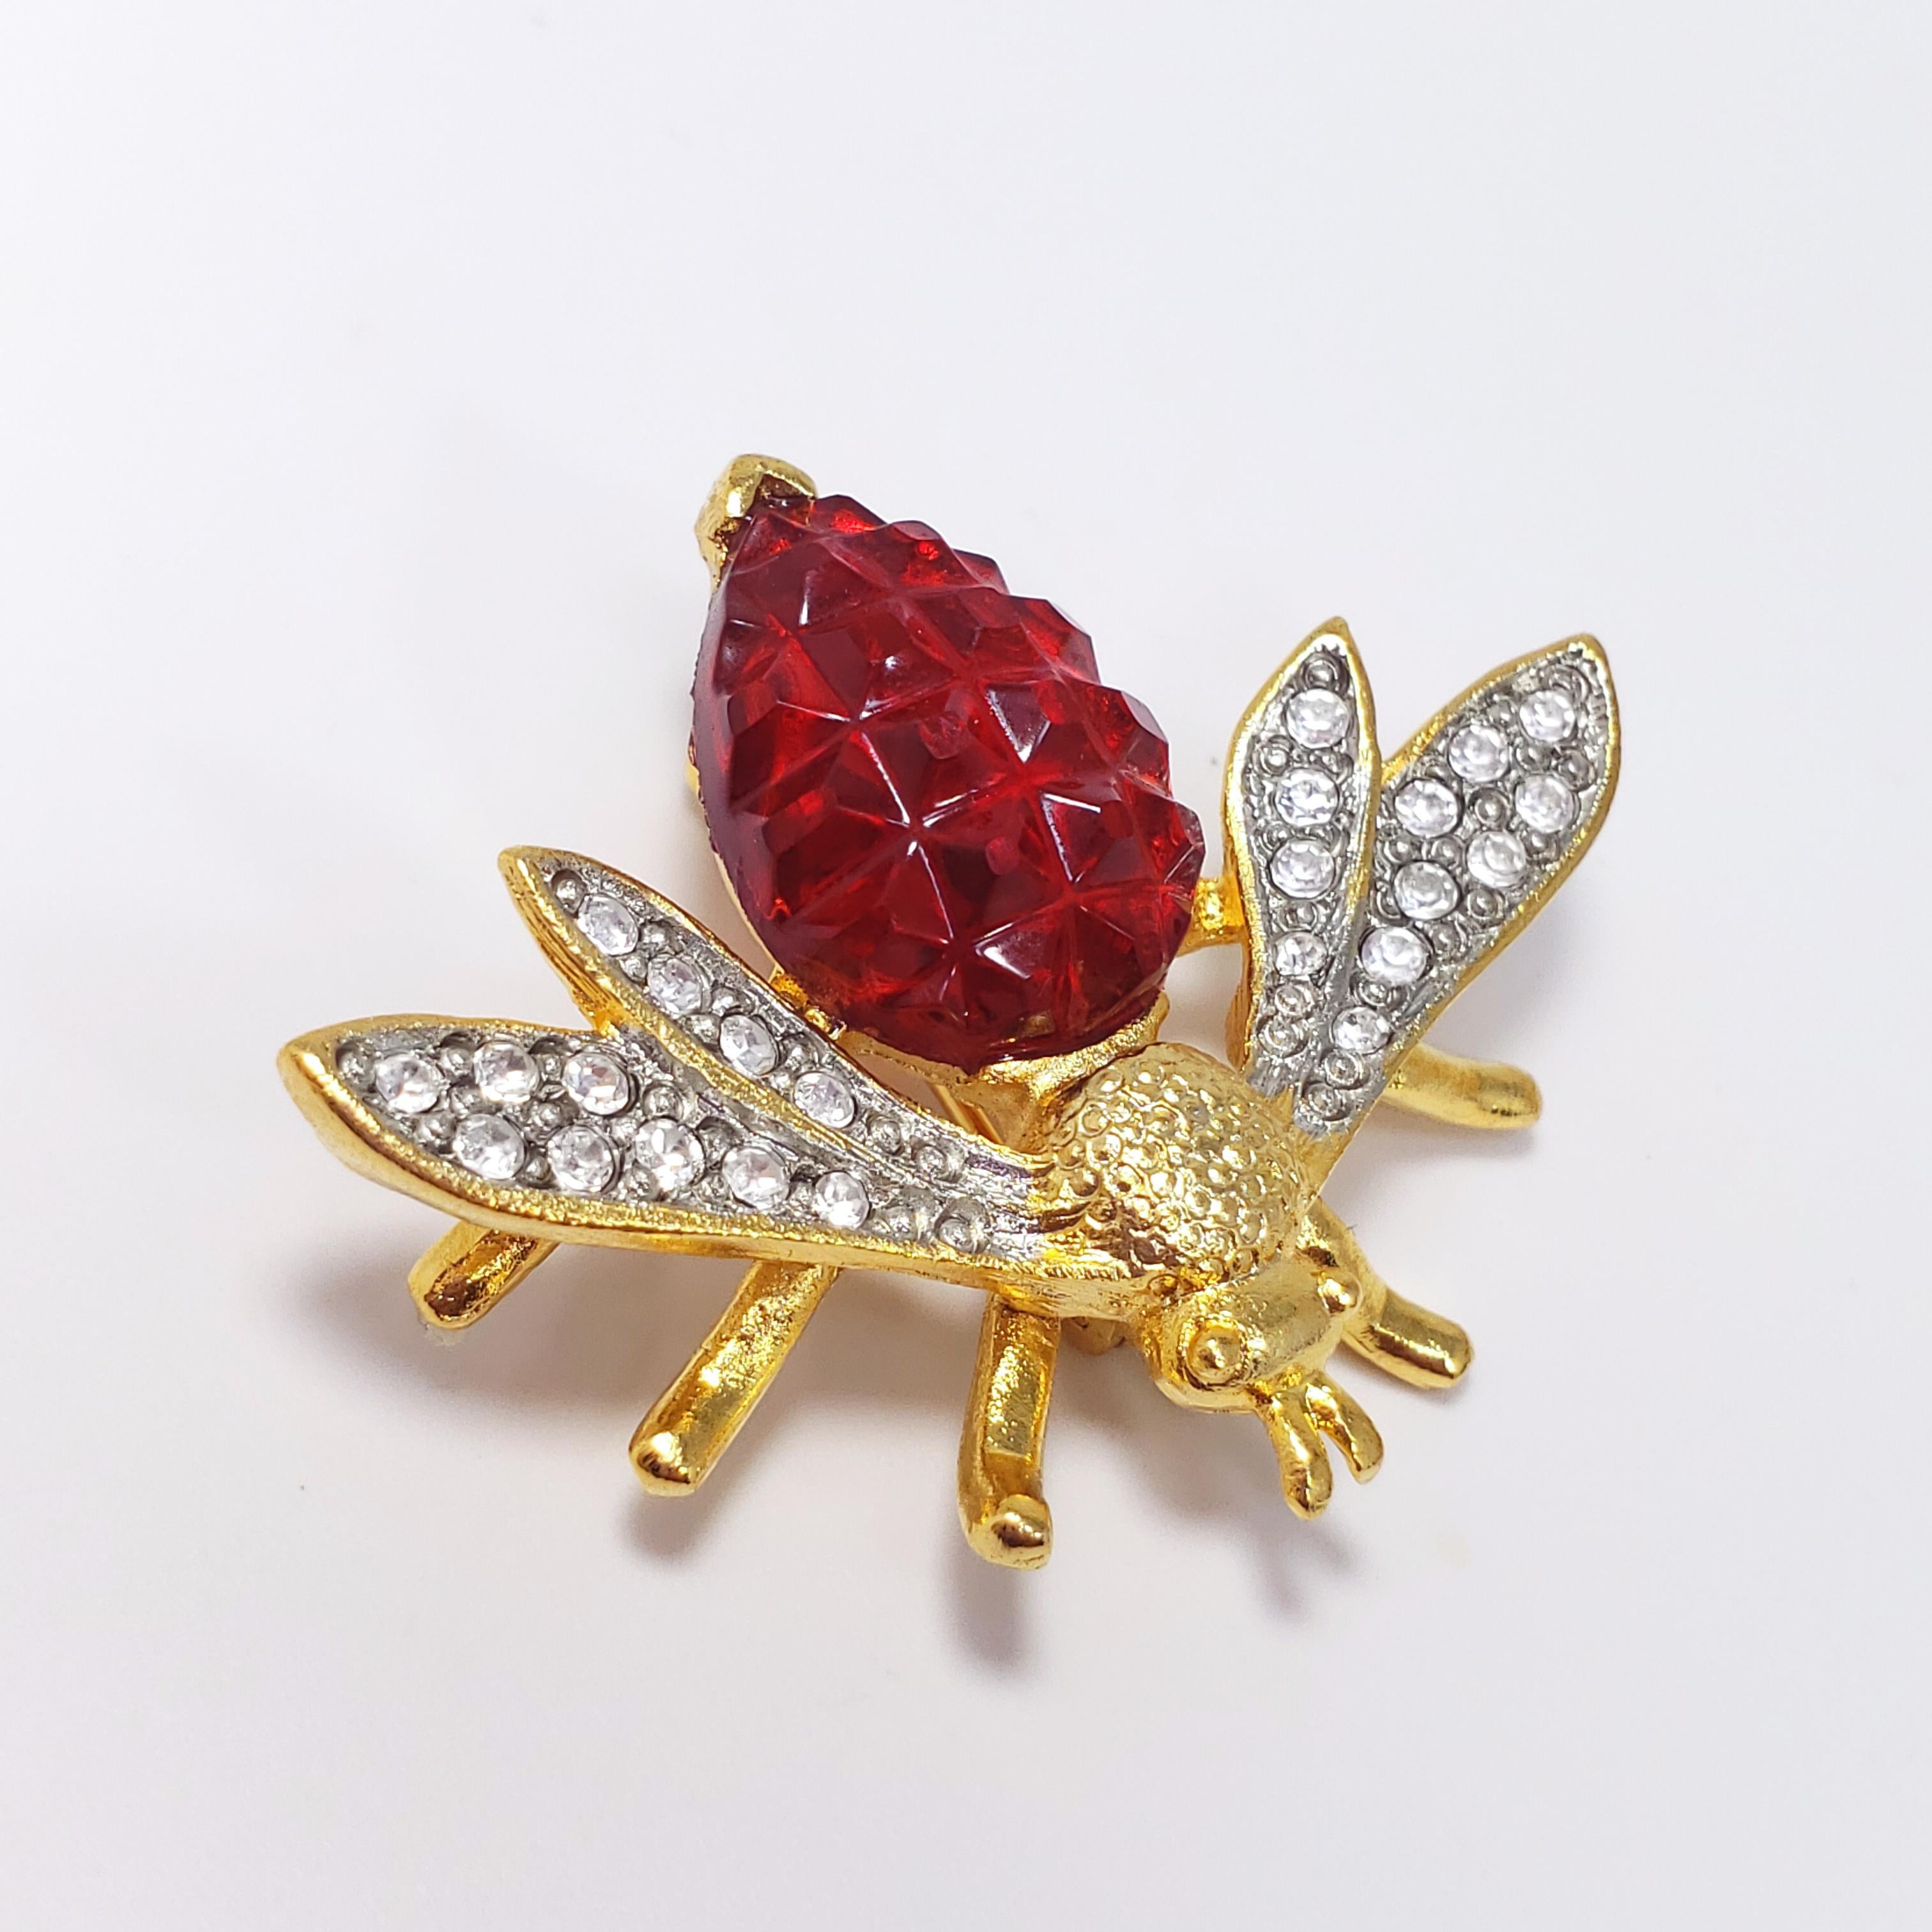 A colorful pin/brooch by Kenneth Jay Lane, the expert in costume jewelry! A fly/wasp/insect with clear crystal covered wings and a ruby-colored carved crystal abdomen, set in gold tone. Excellent for a formal occasion, or as a quirky